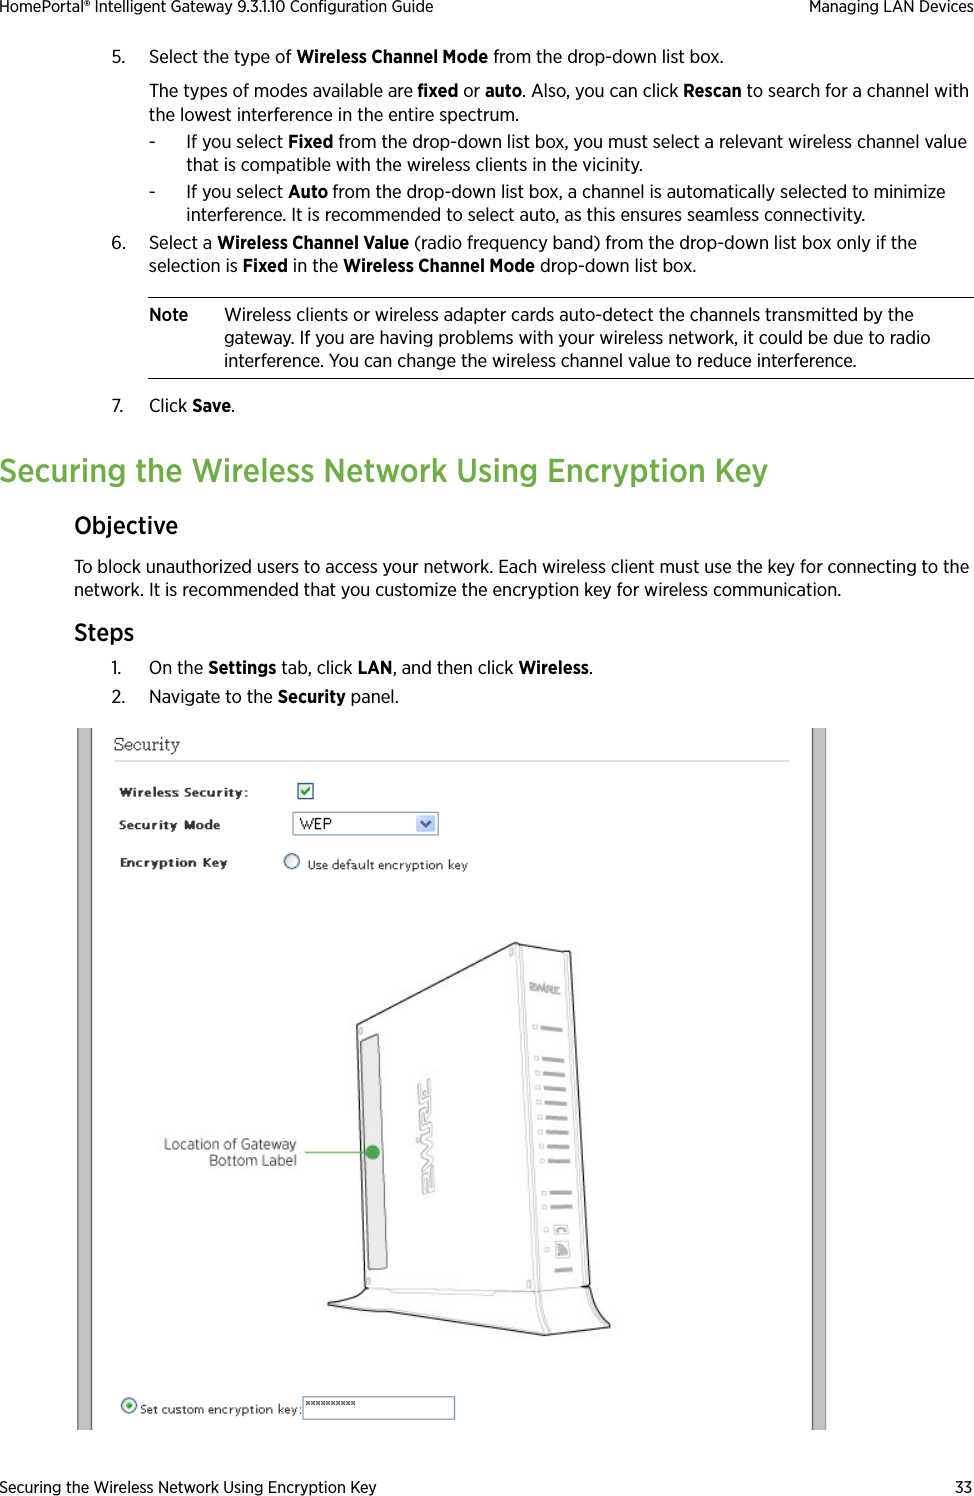 Securing the Wireless Network Using Encryption Key 33HomePortal® Intelligent Gateway 9.3.1.10 Configuration Guide Managing LAN Devices5. Select the type of Wireless Channel Mode from the drop-down list box. The types of modes available are fixed or auto. Also, you can click Rescan to search for a channel with the lowest interference in the entire spectrum.- If you select Fixed from the drop-down list box, you must select a relevant wireless channel value that is compatible with the wireless clients in the vicinity.- If you select Auto from the drop-down list box, a channel is automatically selected to minimize interference. It is recommended to select auto, as this ensures seamless connectivity.6. Select a Wireless Channel Value (radio frequency band) from the drop-down list box only if the selection is Fixed in the Wireless Channel Mode drop-down list box. Note Wireless clients or wireless adapter cards auto-detect the channels transmitted by the gateway. If you are having problems with your wireless network, it could be due to radio interference. You can change the wireless channel value to reduce interference.7. Click Save.Securing the Wireless Network Using Encryption KeyObjectiveTo block unauthorized users to access your network. Each wireless client must use the key for connecting to the network. It is recommended that you customize the encryption key for wireless communication.Steps1. On the Settings tab, click LAN, and then click Wireless.2. Navigate to the Security panel.